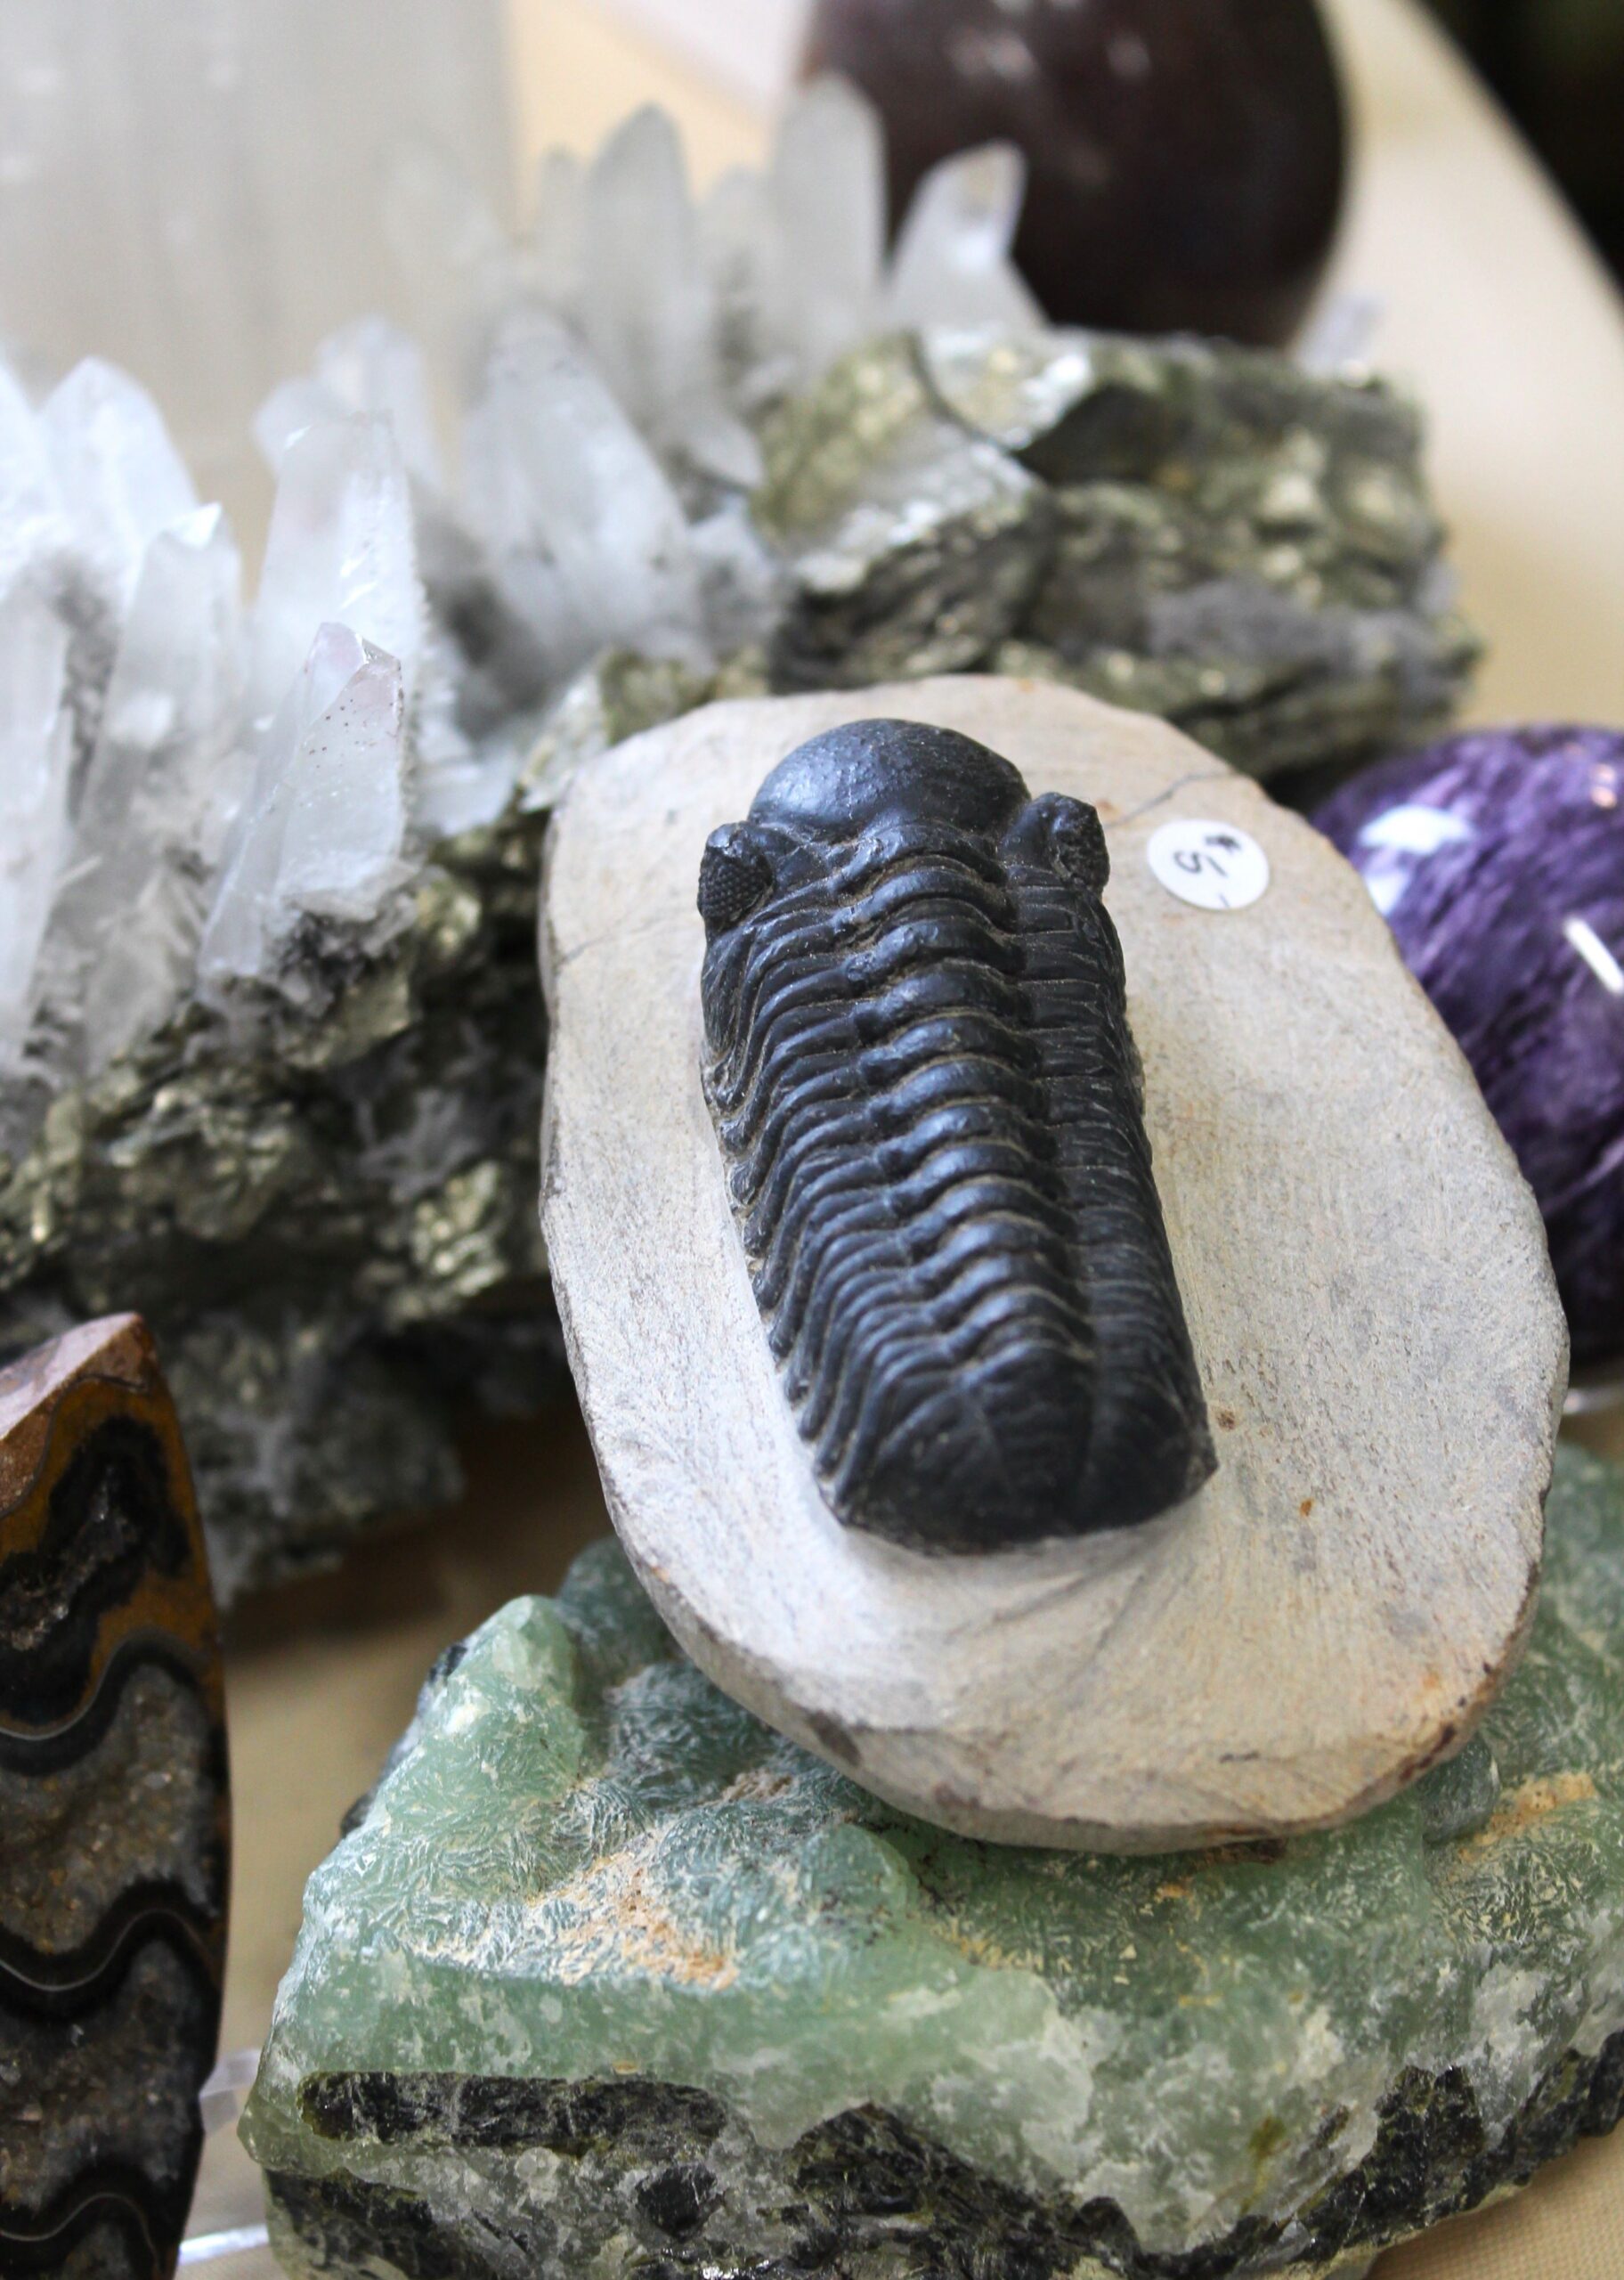 trilobite picture for kids geology